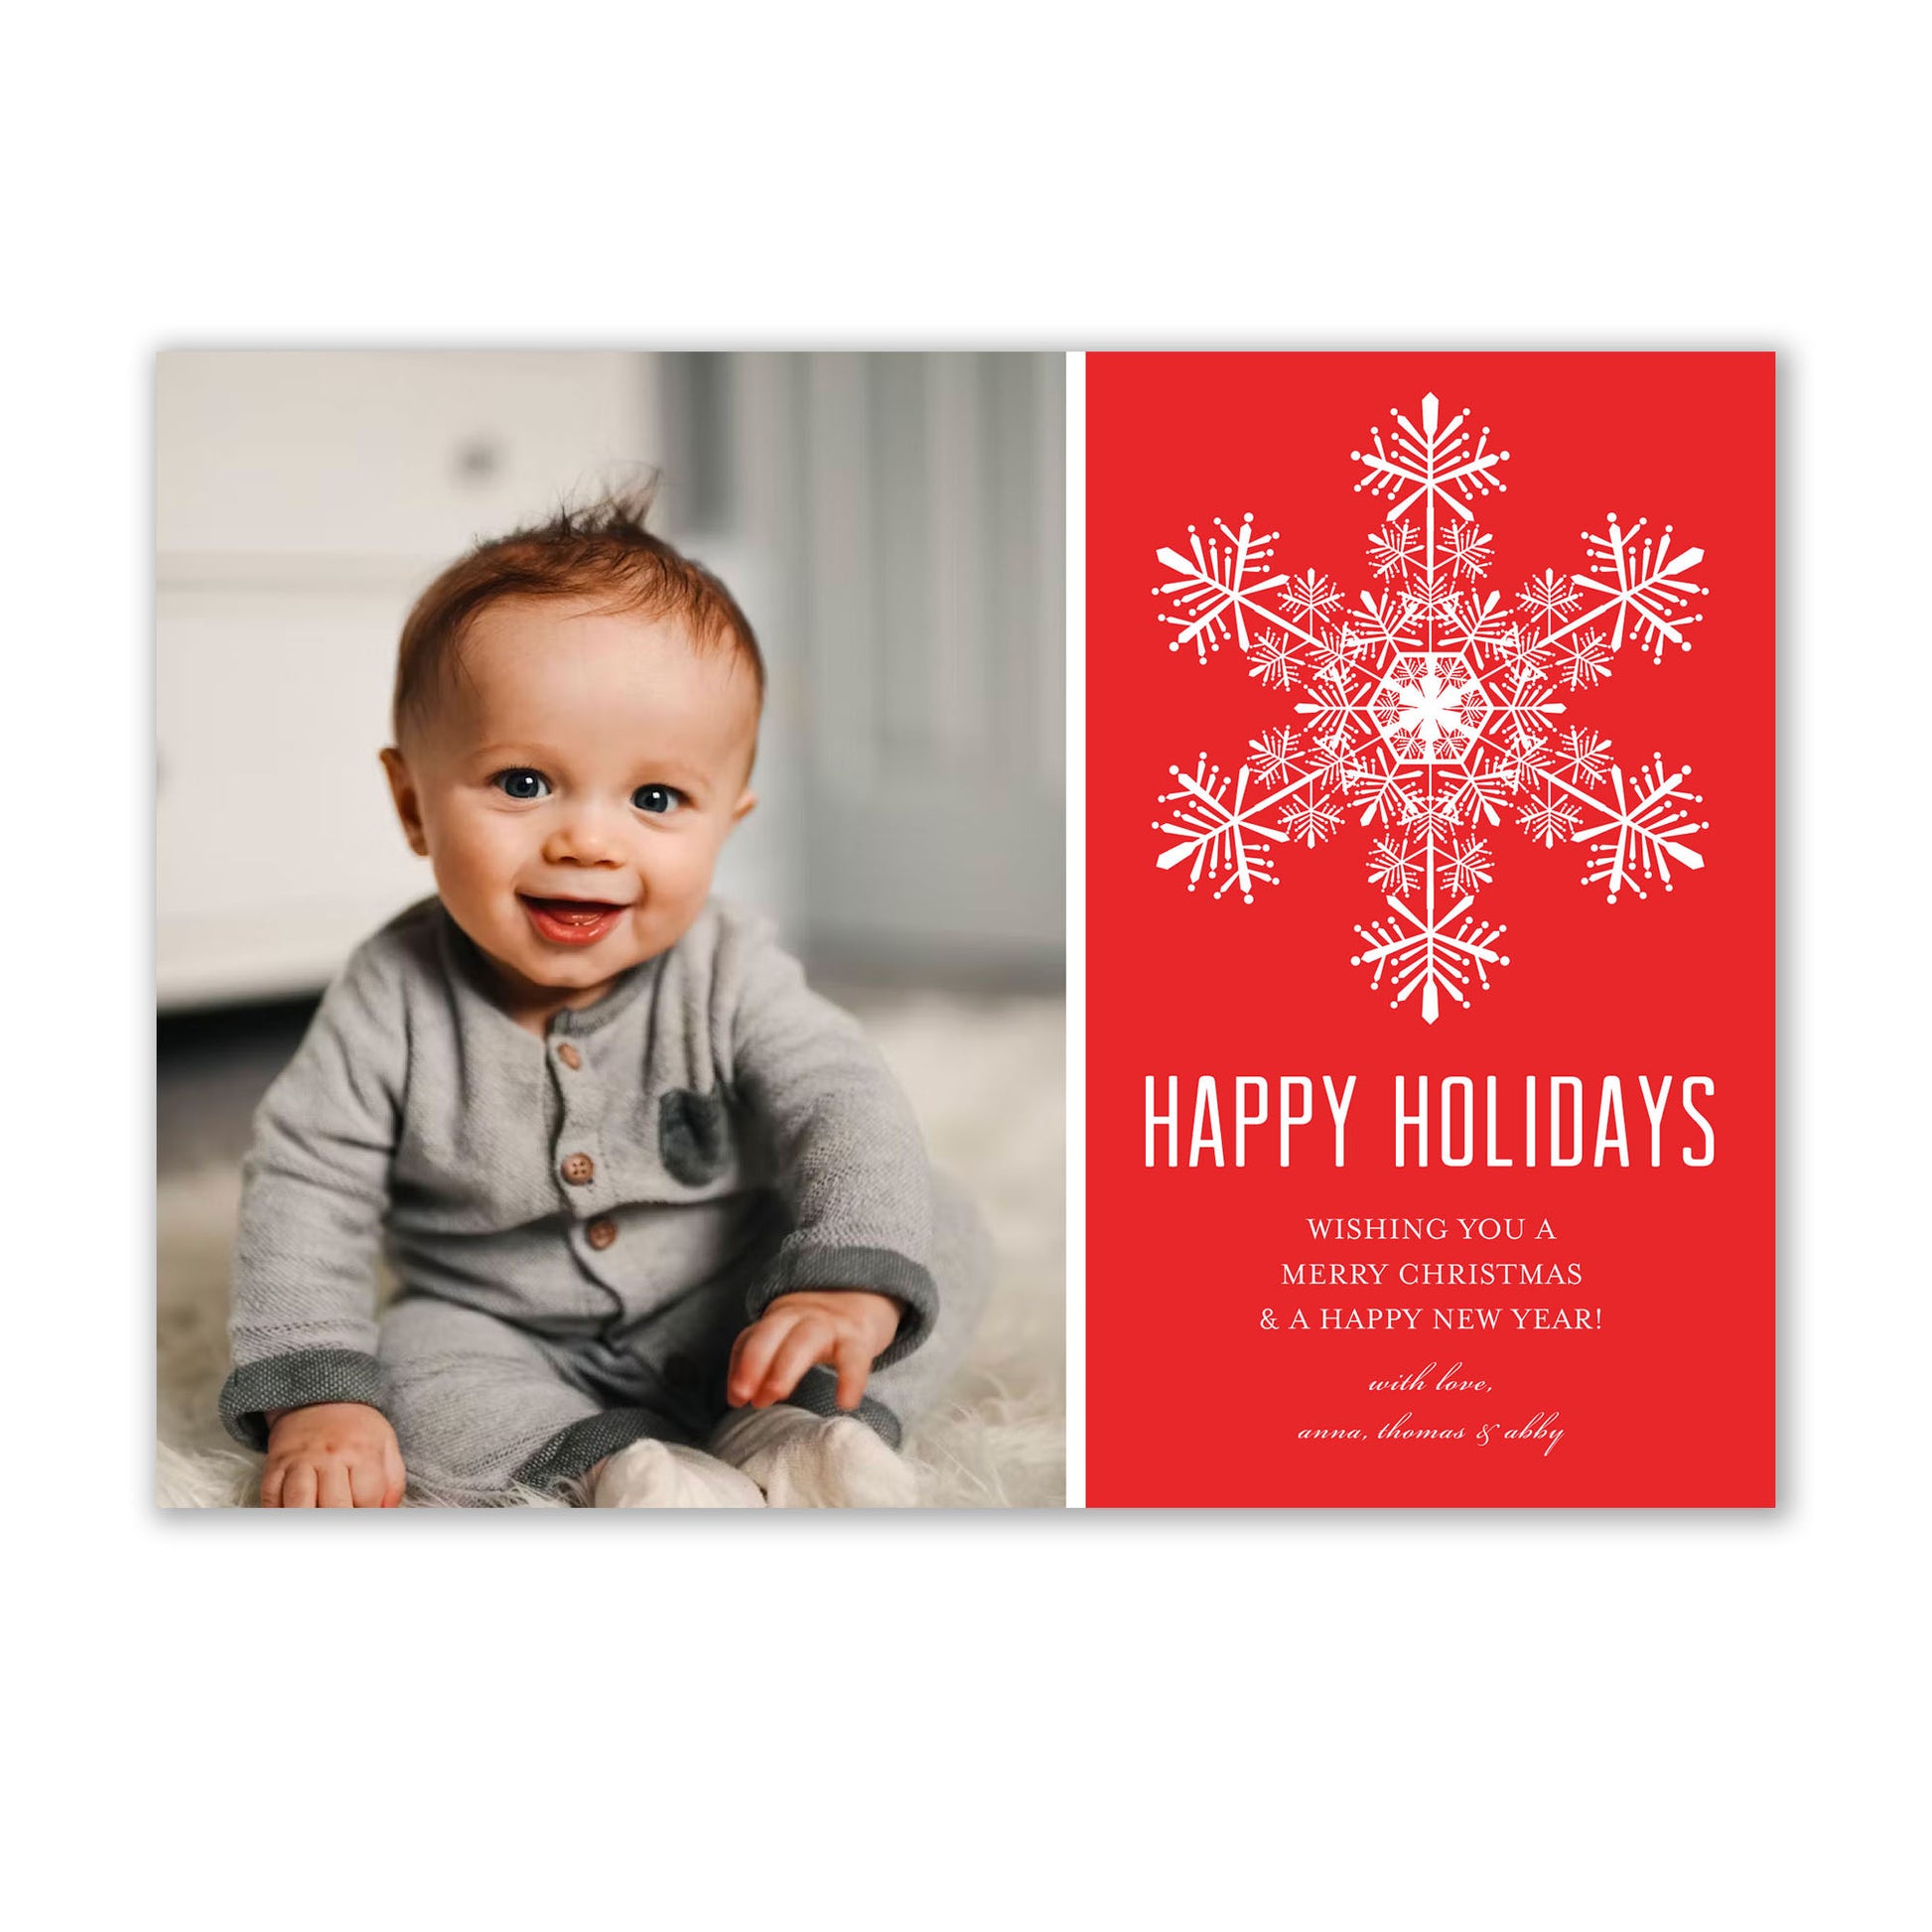 An Elegant Snowflake Holiday Photo Cards baby sitting on the floor. (Brand Name: Noteworthy)